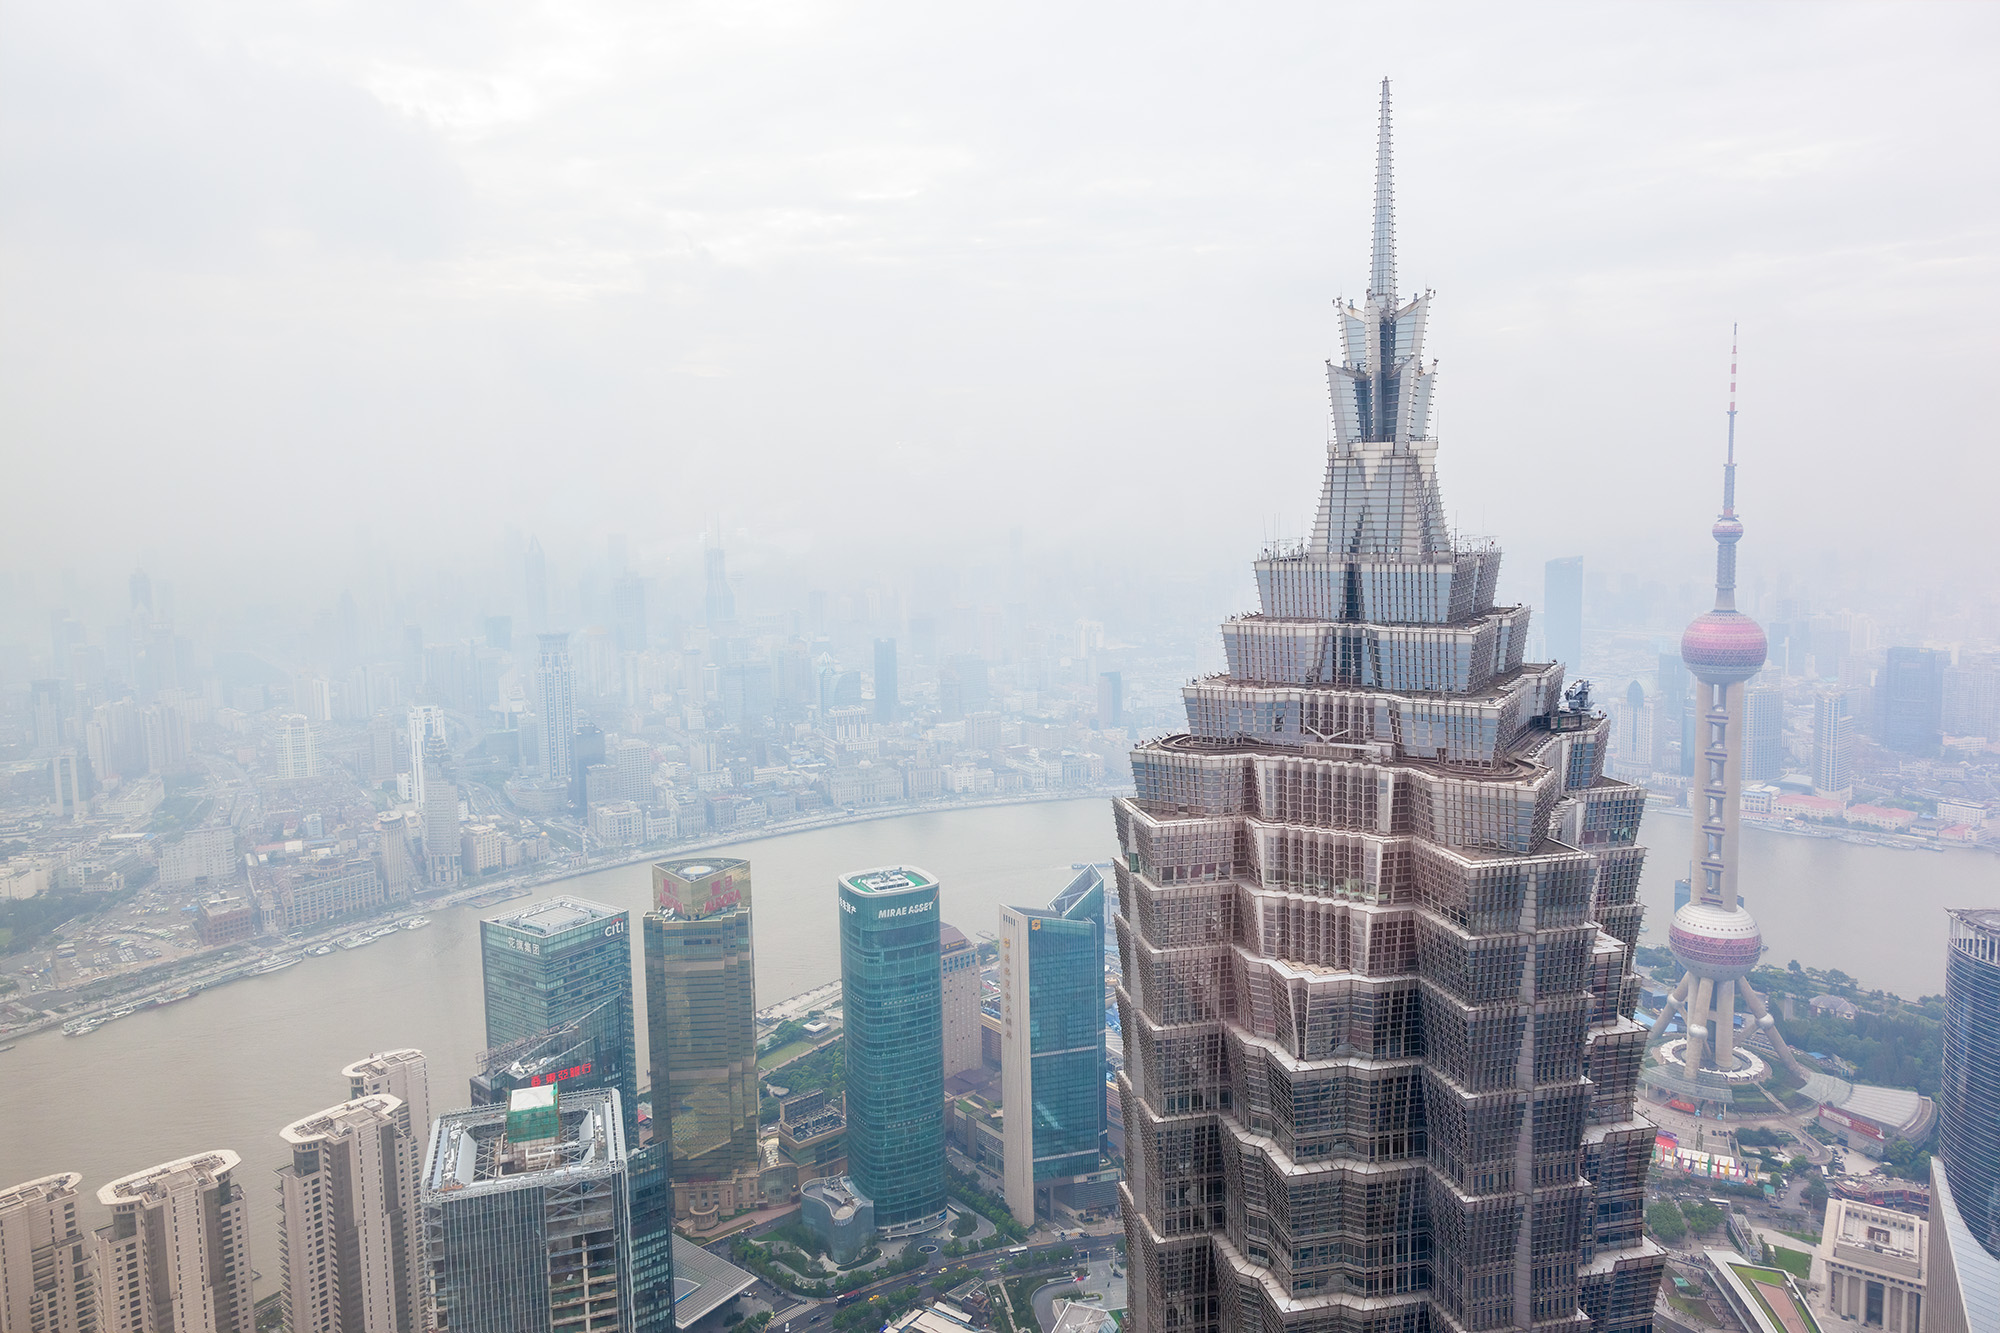 From the 87th floor of the Hyatt hotel in Shanghai's World Financial Center, this photo offers an intimate view of the Jin Mao...